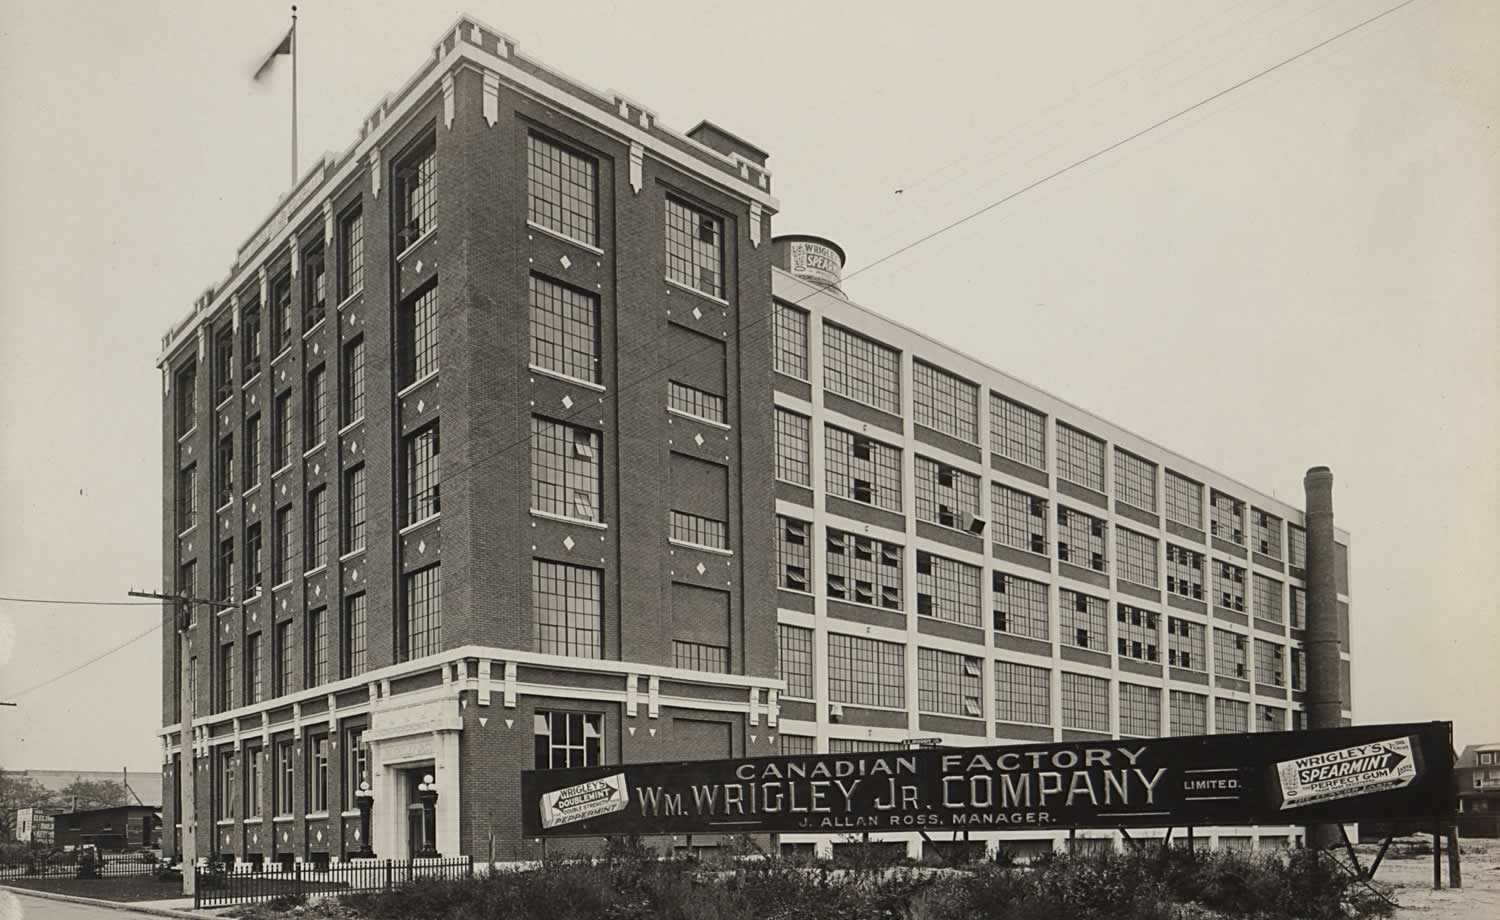 Black and white image of five-storey factory with large windows. A large sign beside the building reads: 'Canadian Factory: Wm. Wrigley Jr. Company, J. Allan Ross, manager'.